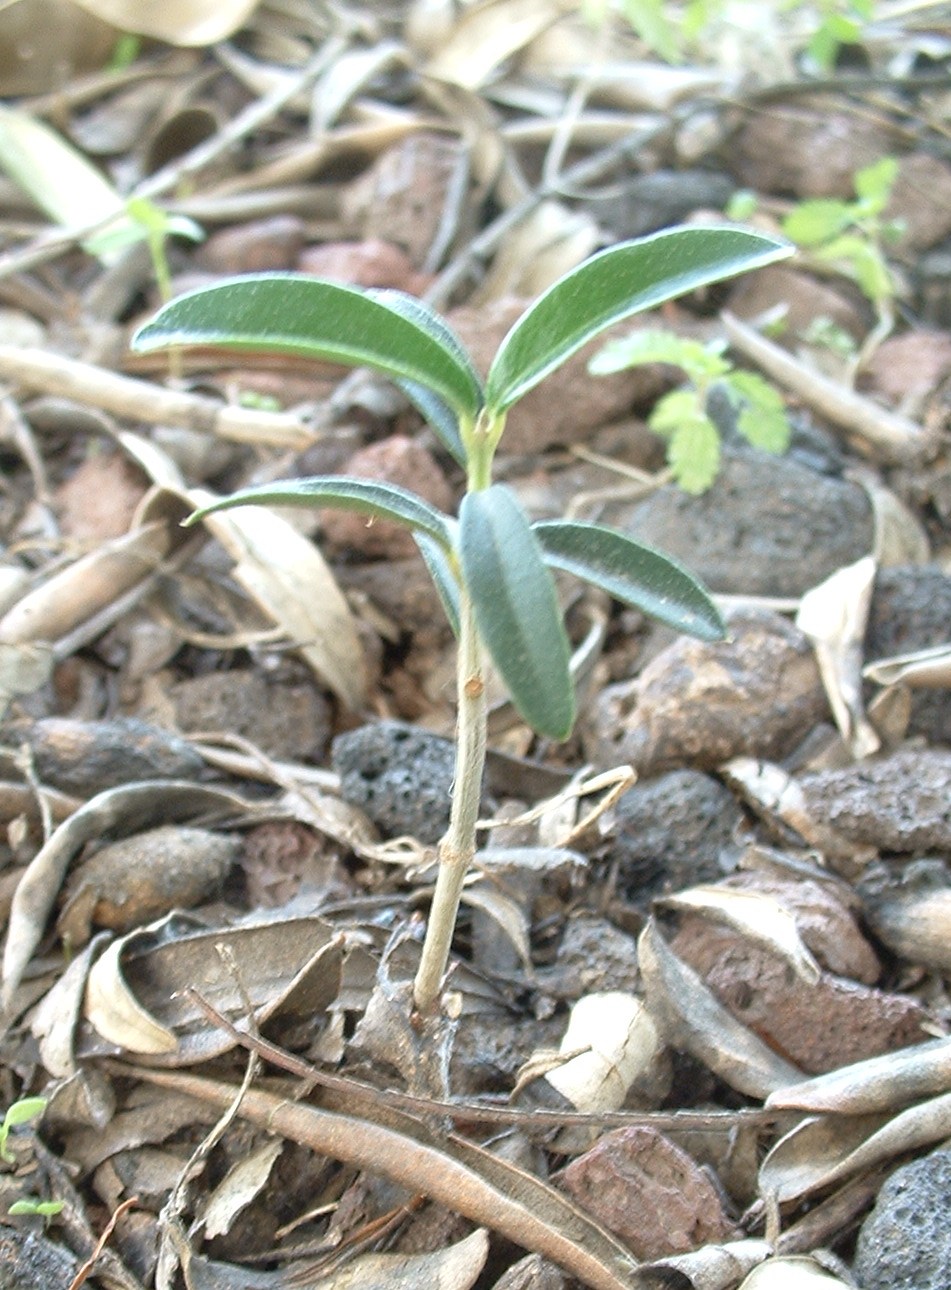 A sprout, germinated from a seed